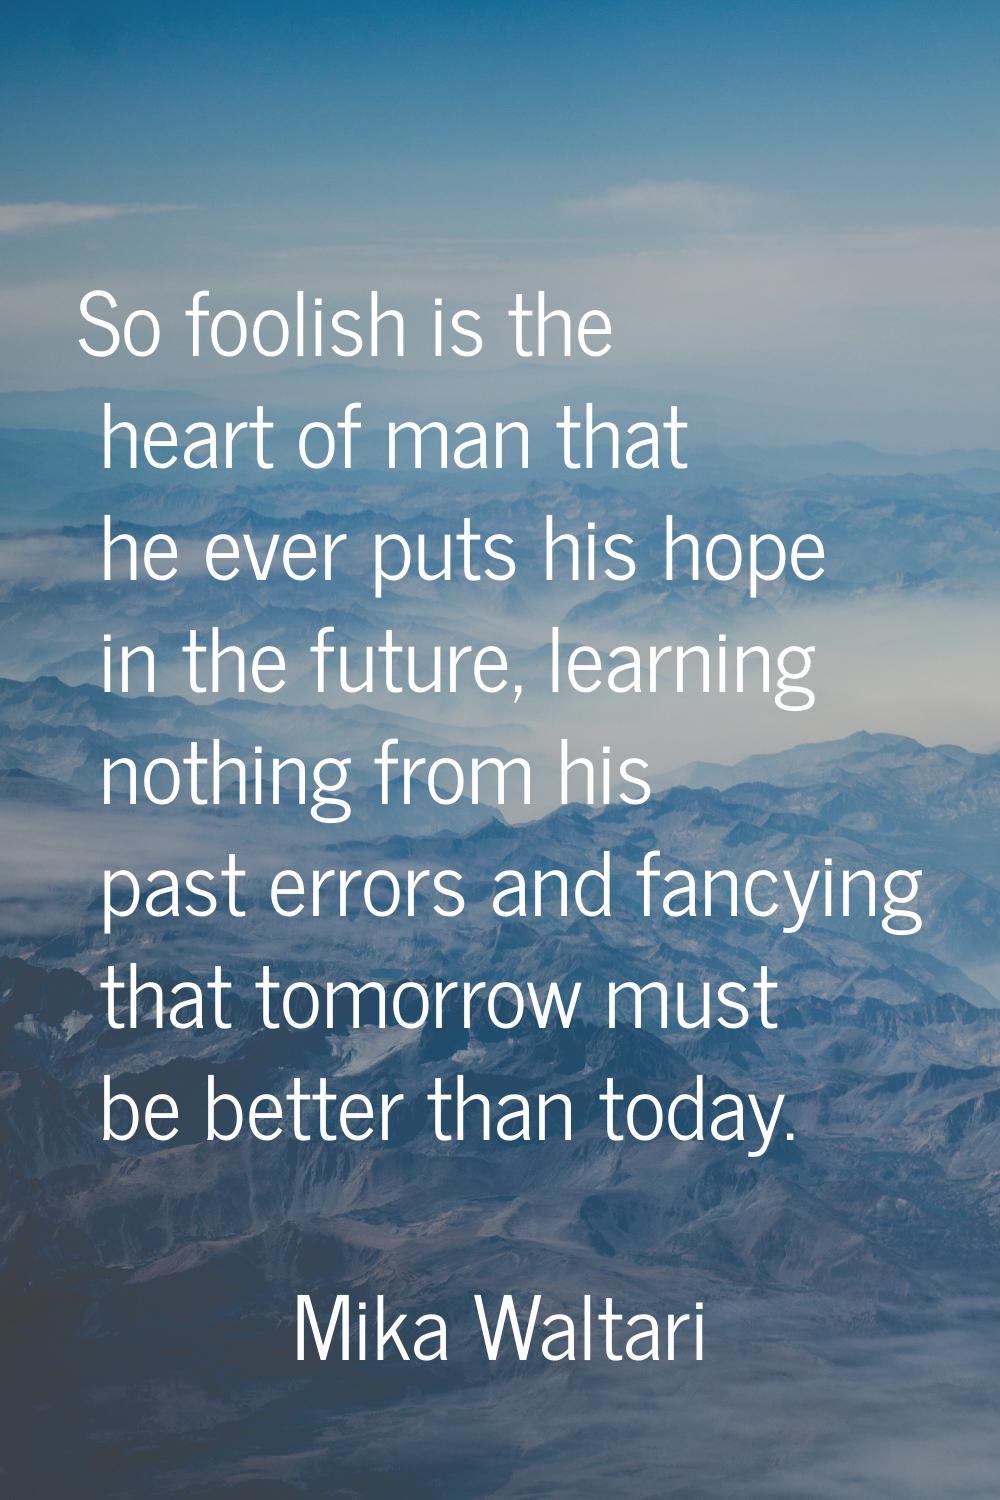 So foolish is the heart of man that he ever puts his hope in the future, learning nothing from his 